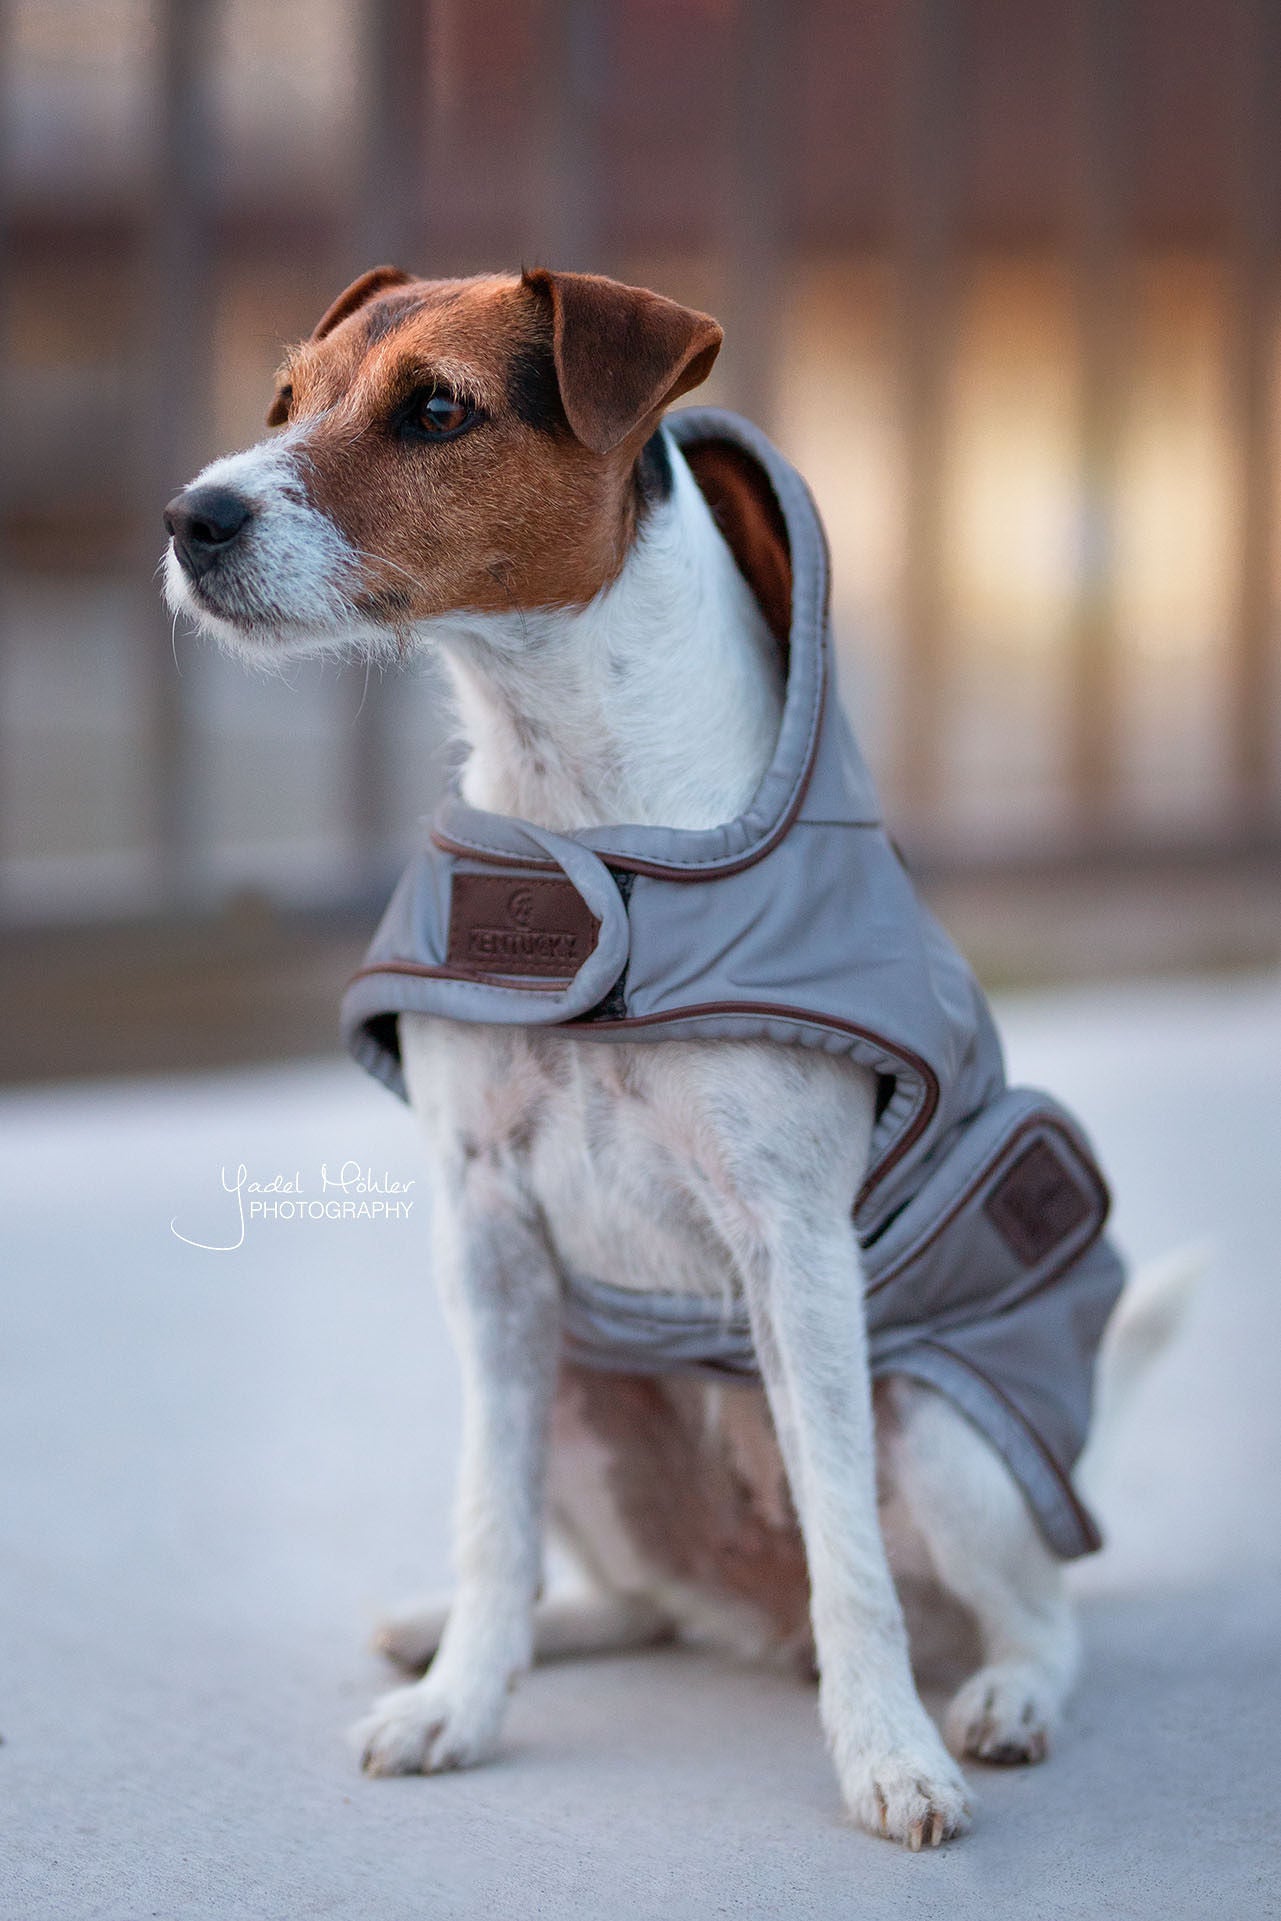 The Kentucky reflective dog coat. This coat is highly reflective and water repellant, sure to keep your dog safe and dry through the winter.    You can fold the hood up or down for more protection if required. Underneath the hood is a hole for the dog lead. Fastened with two wide Velcro straps round the chest and under the stomach. 